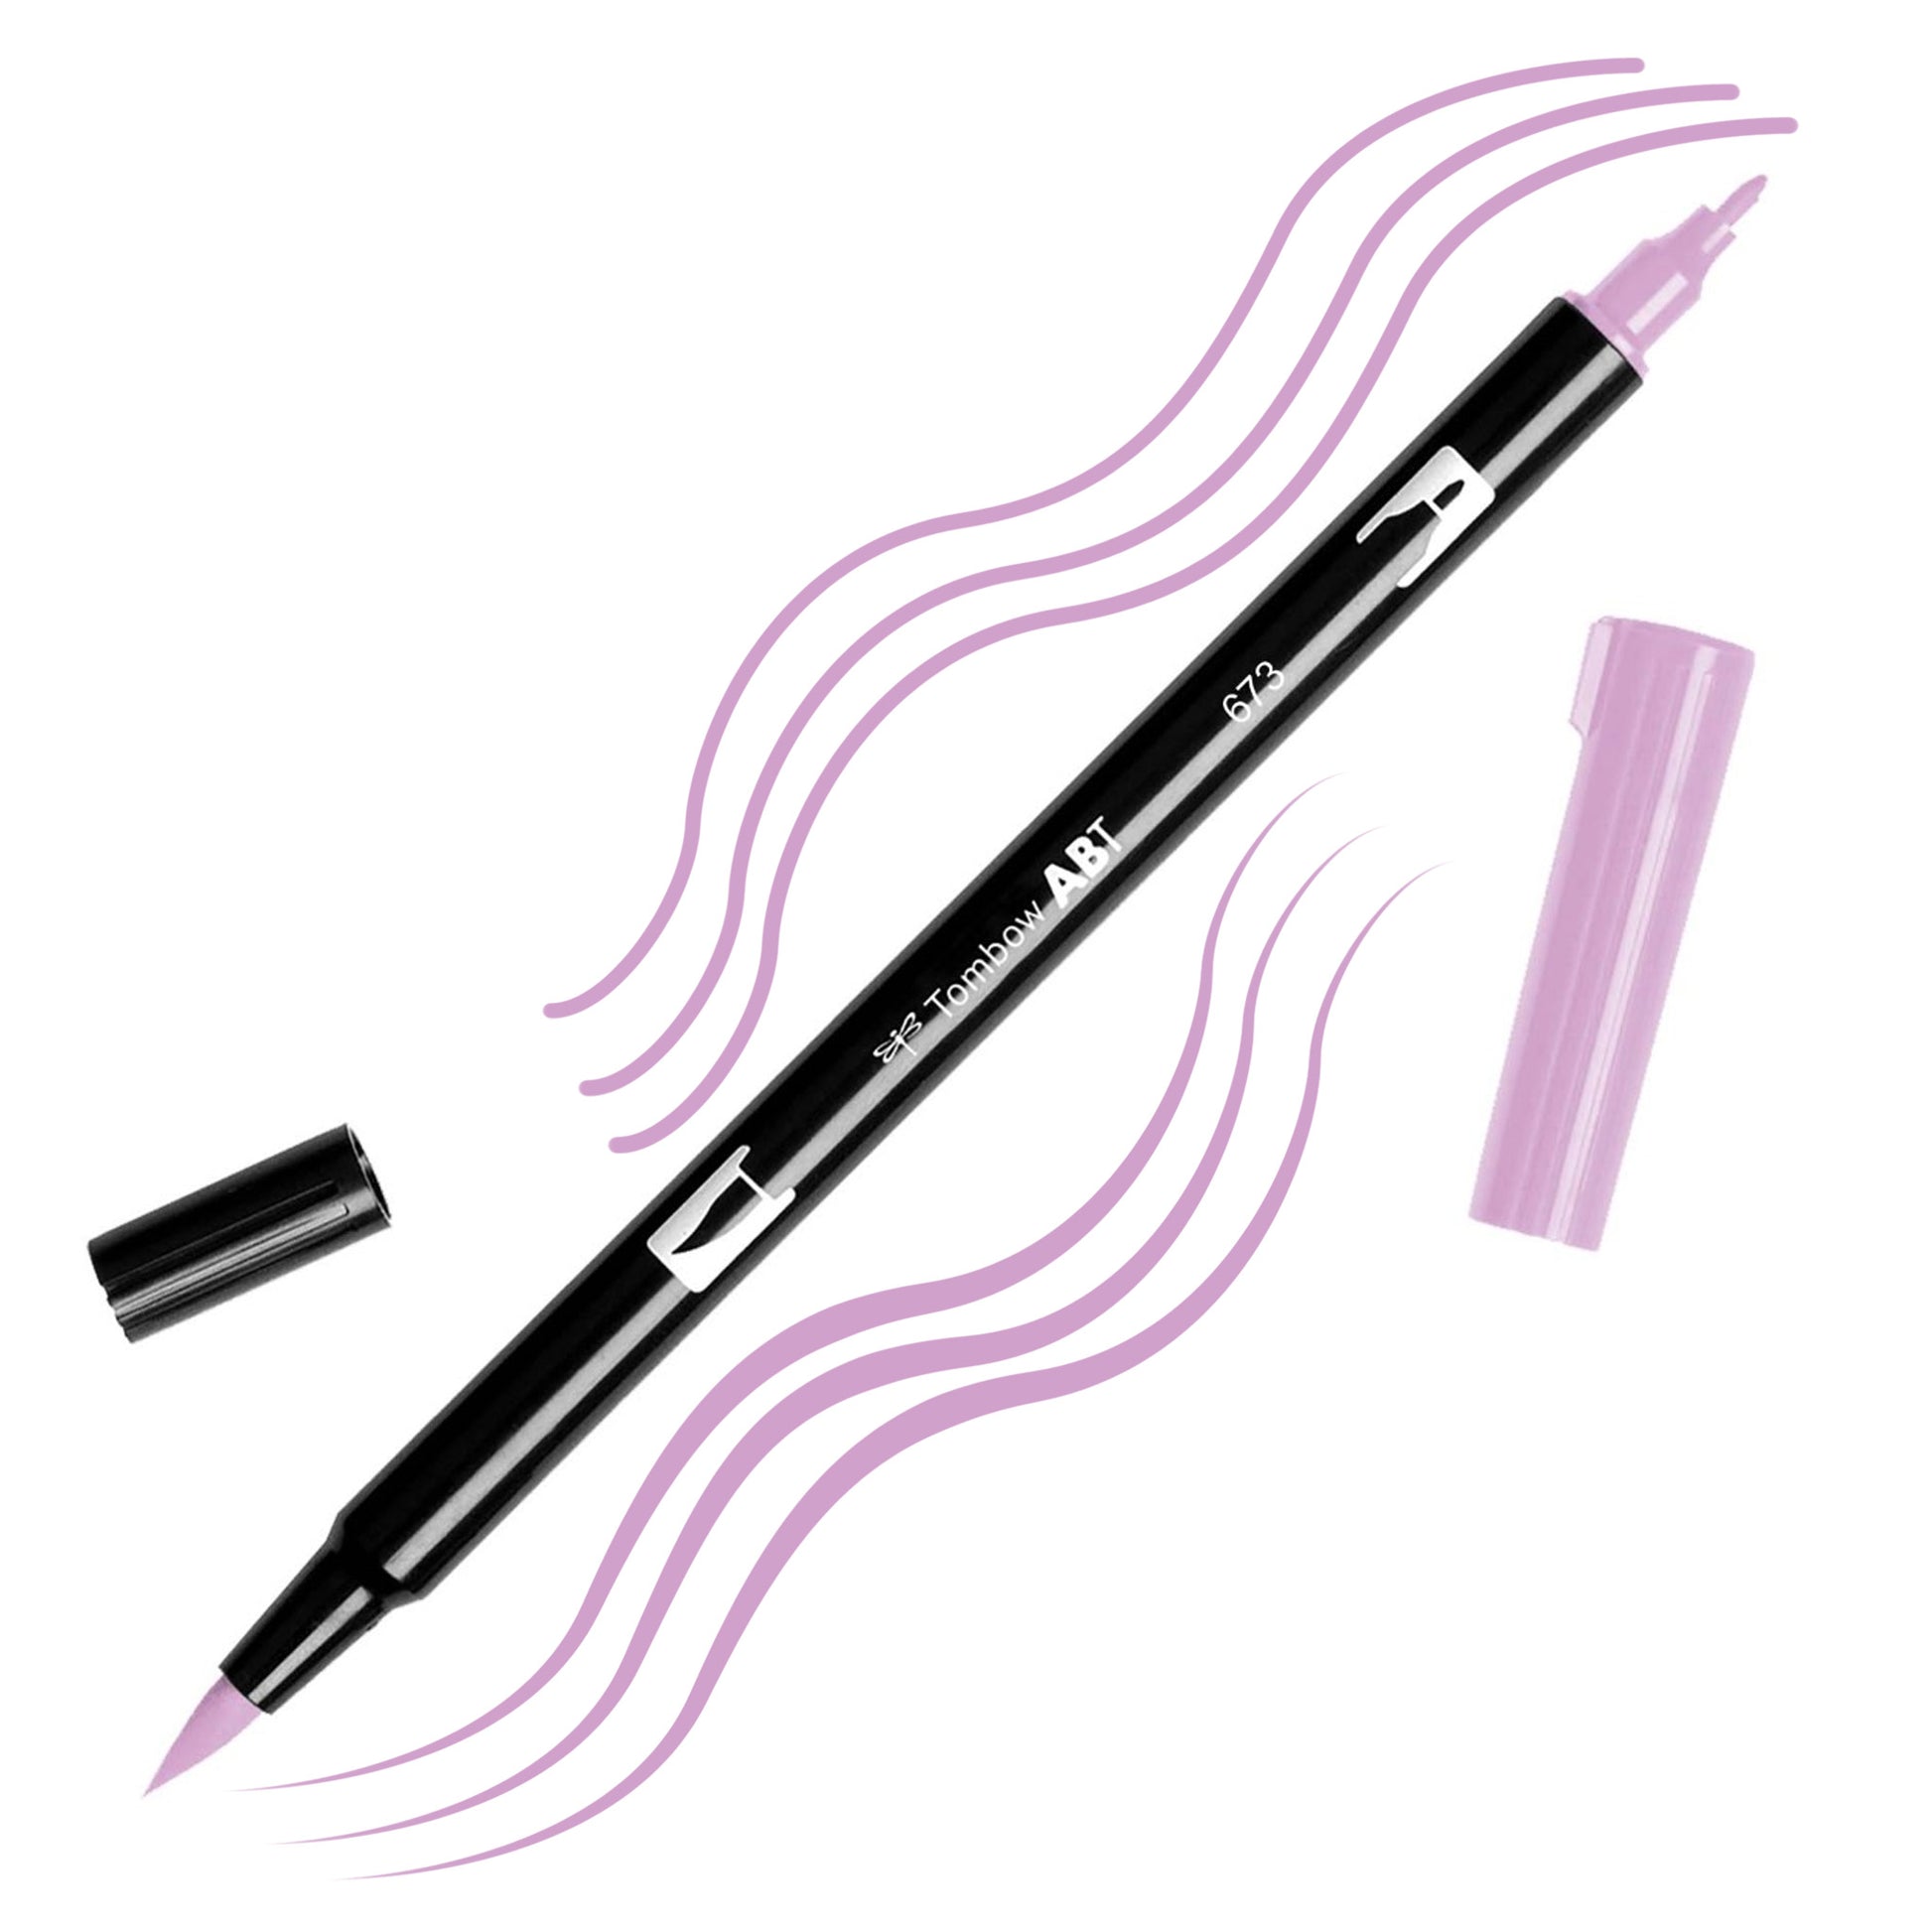 Orchid Tombow double-headed brush-pen with a flexible nylon fiber brush tip and a fine tip against a white background with Orchid strokes